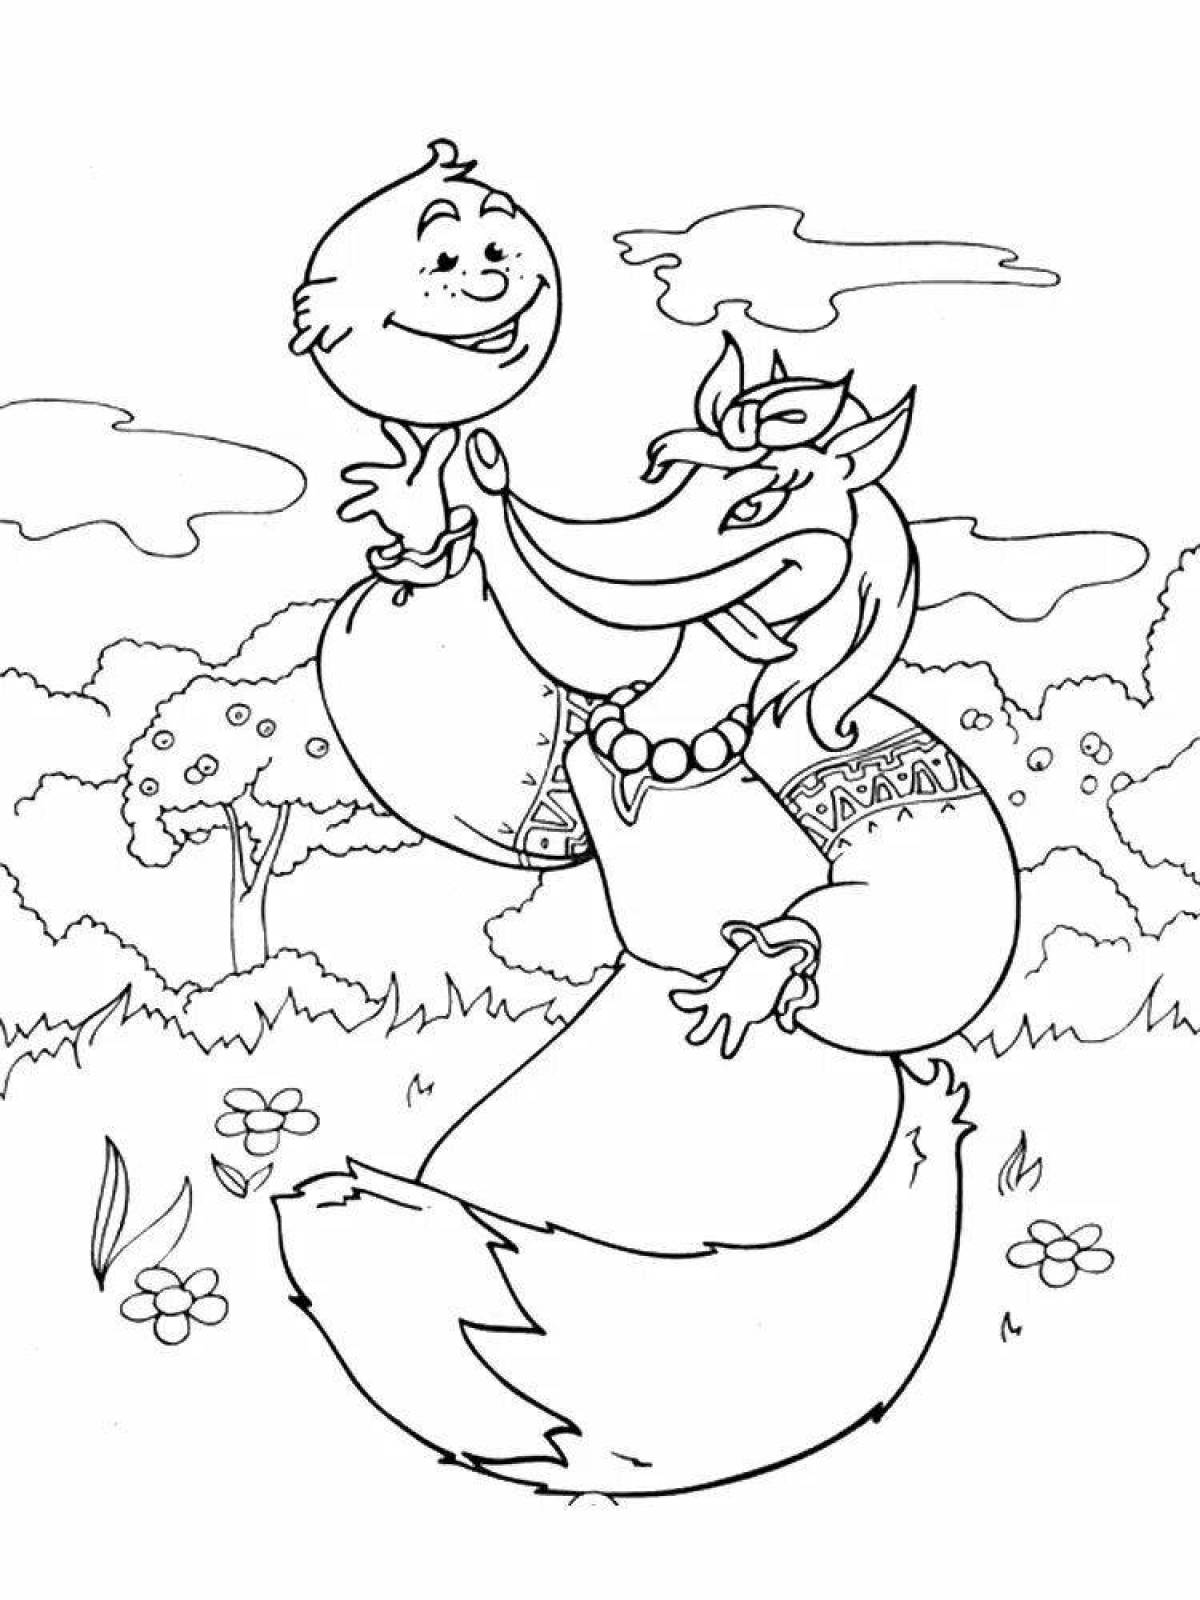 Beautiful muffin character coloring pages